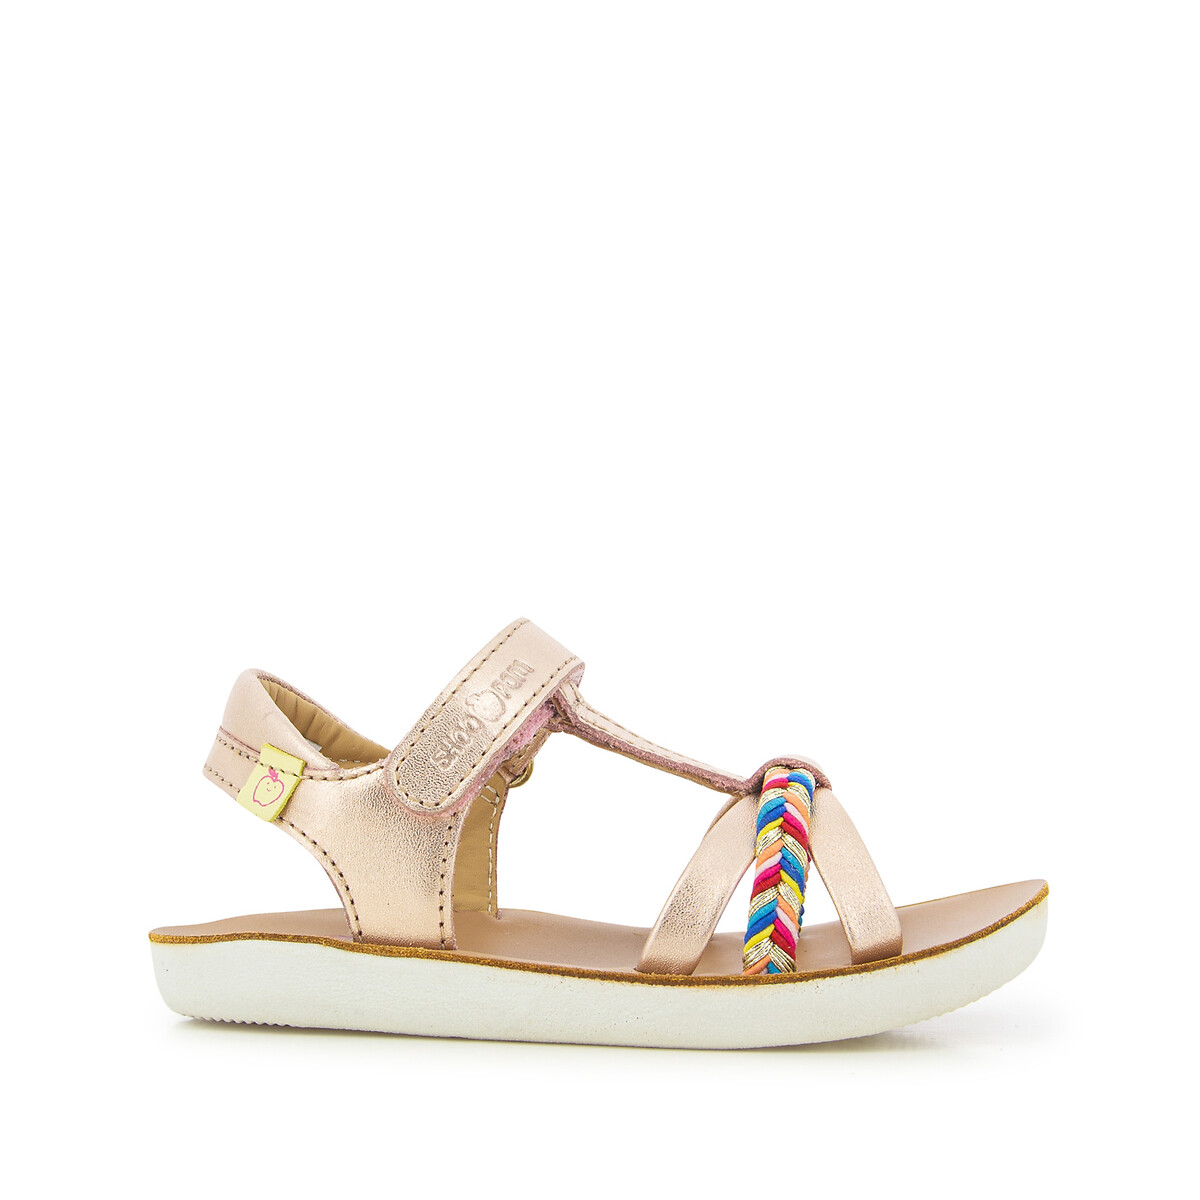 Kids Goa Salome Sandals in Leather with Touch ’n’ Close Fastening